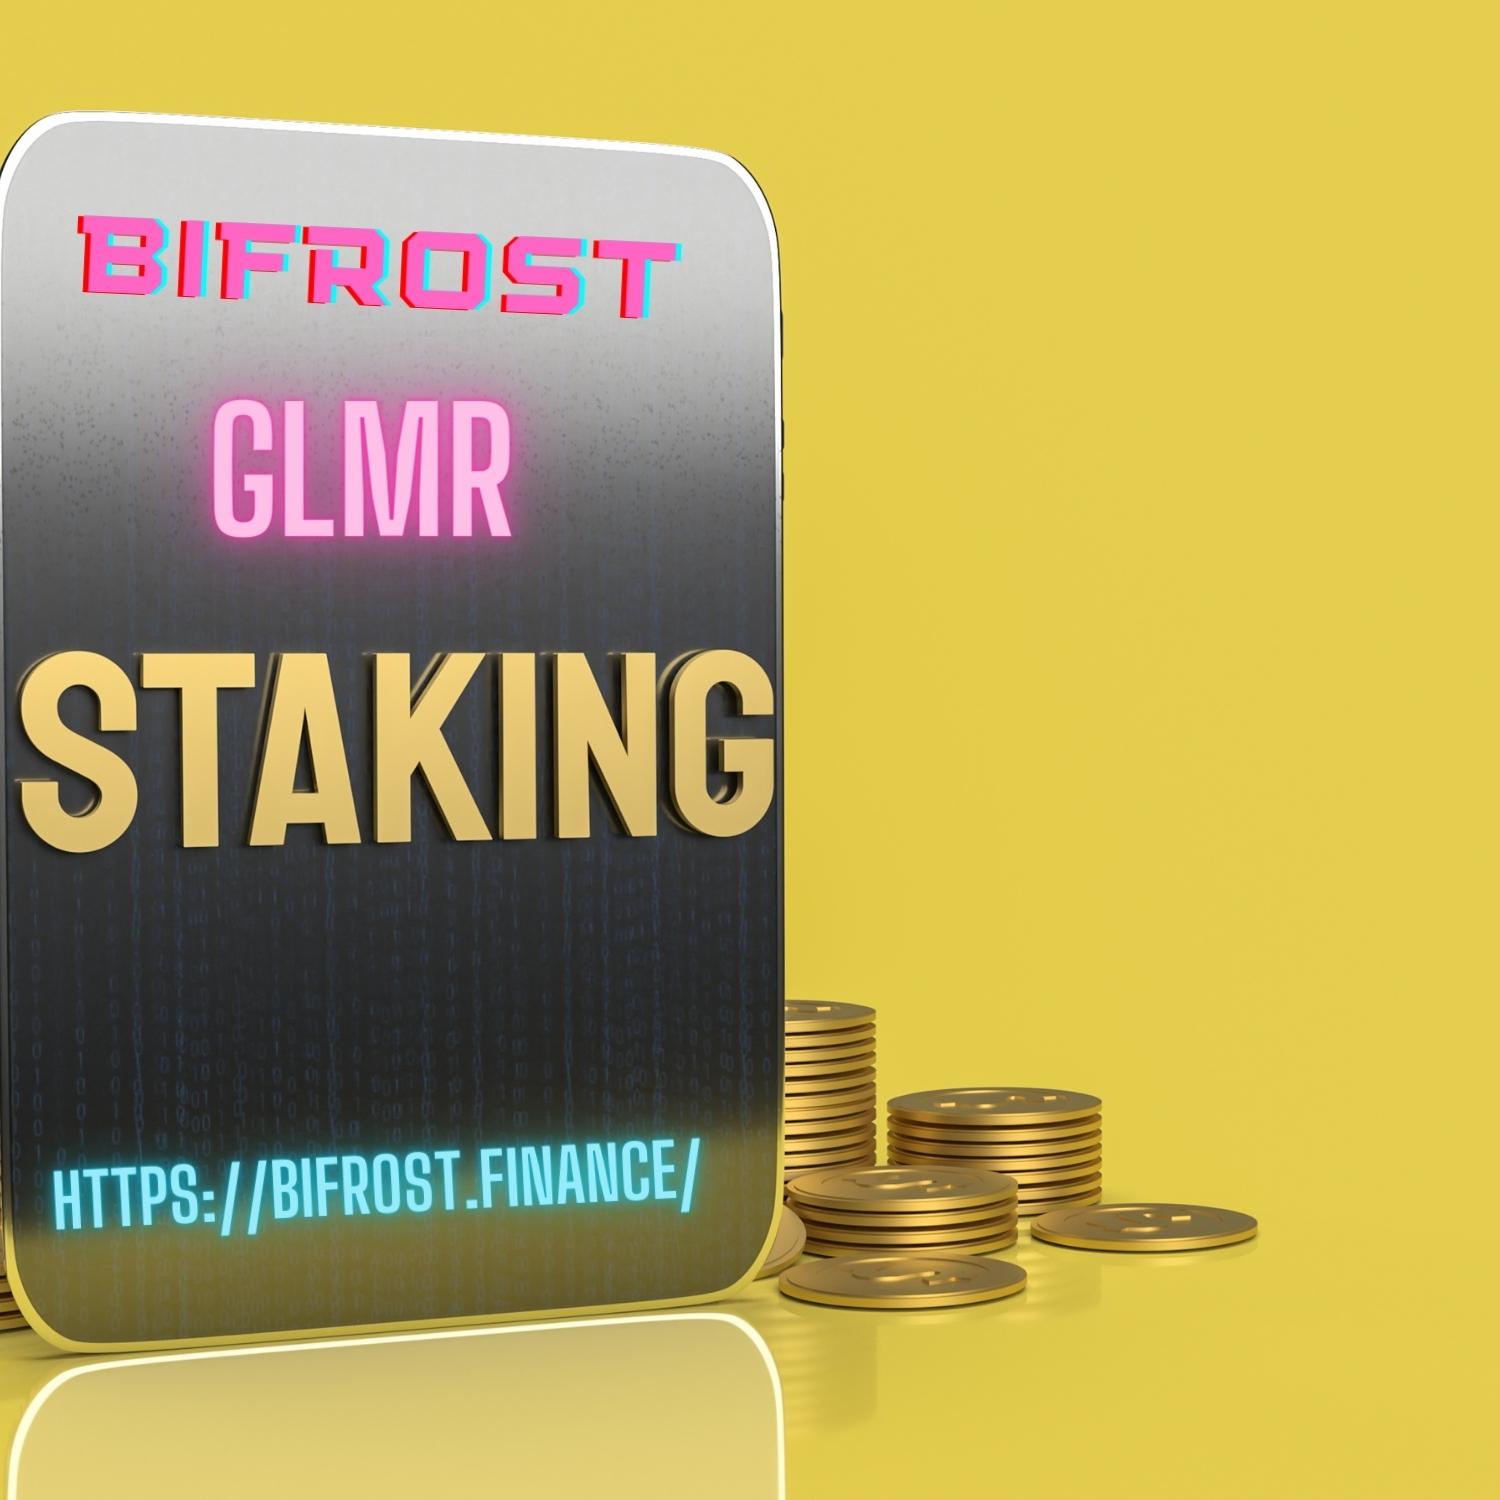 What are the key benefits of participating in GLMR staking, and how does it contribute to the growth and sustainability of the GLMR ecosystem